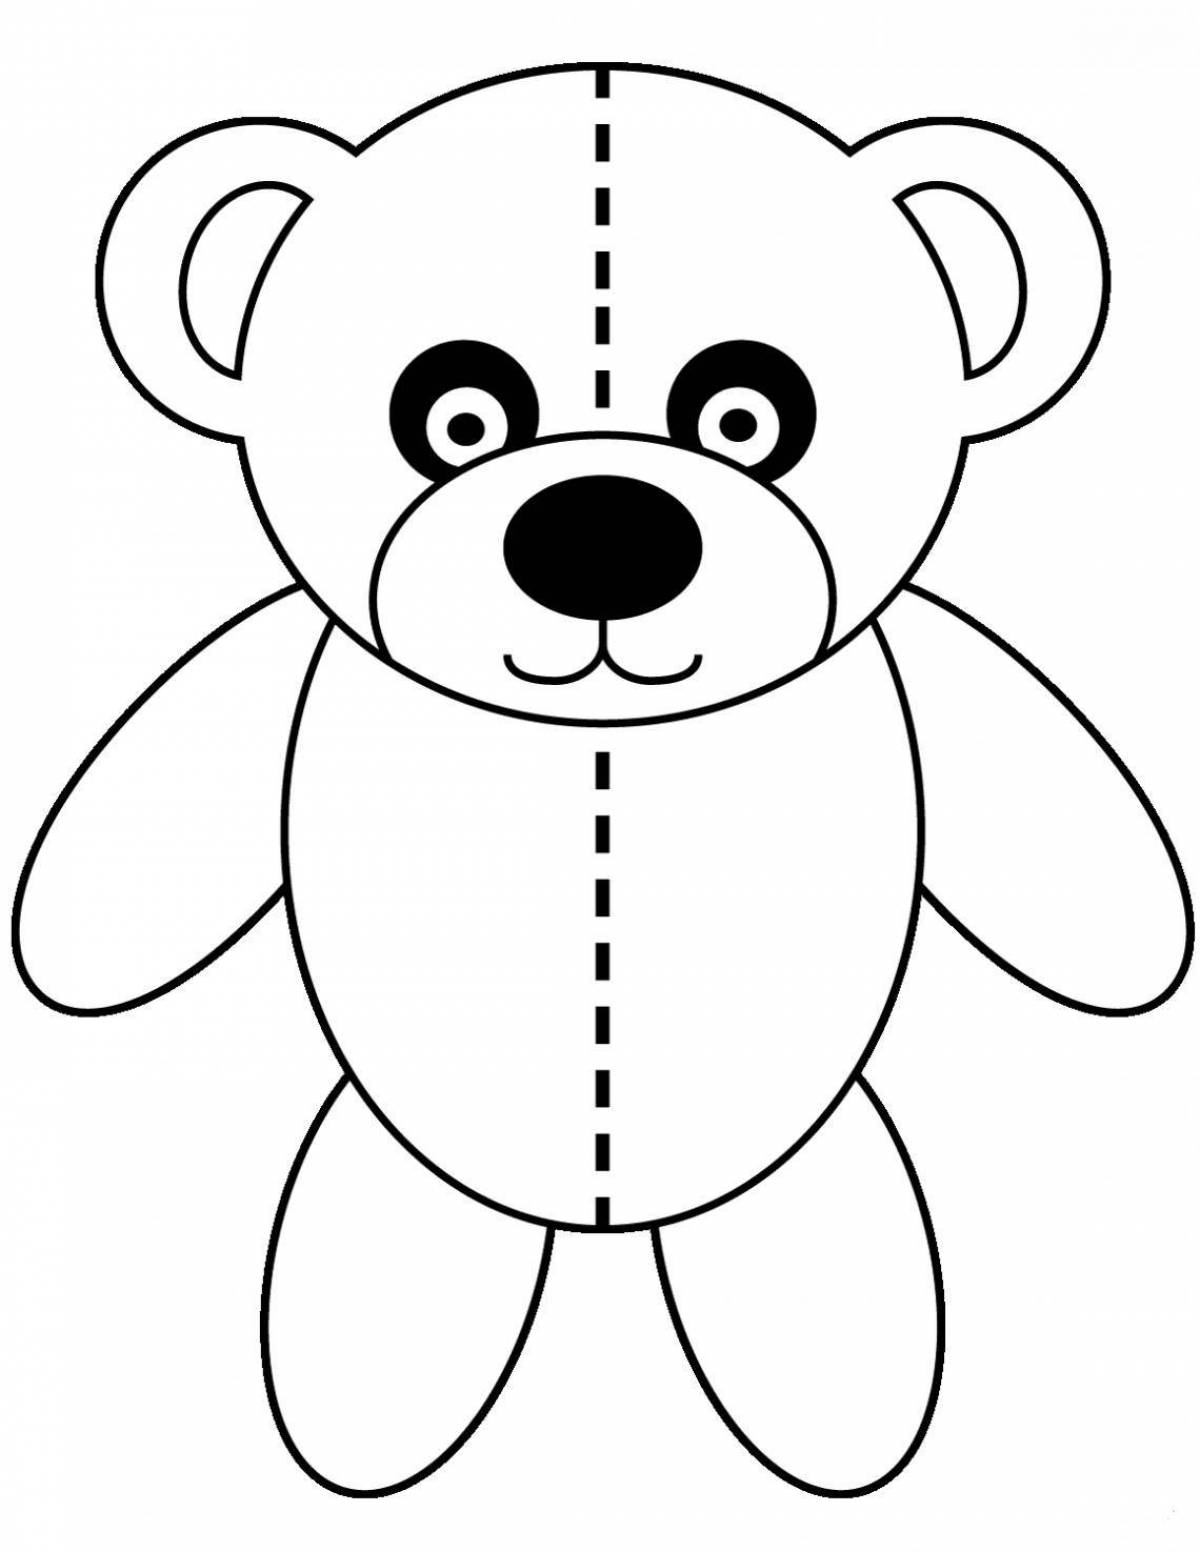 Fun coloring bear for children 4-5 years old